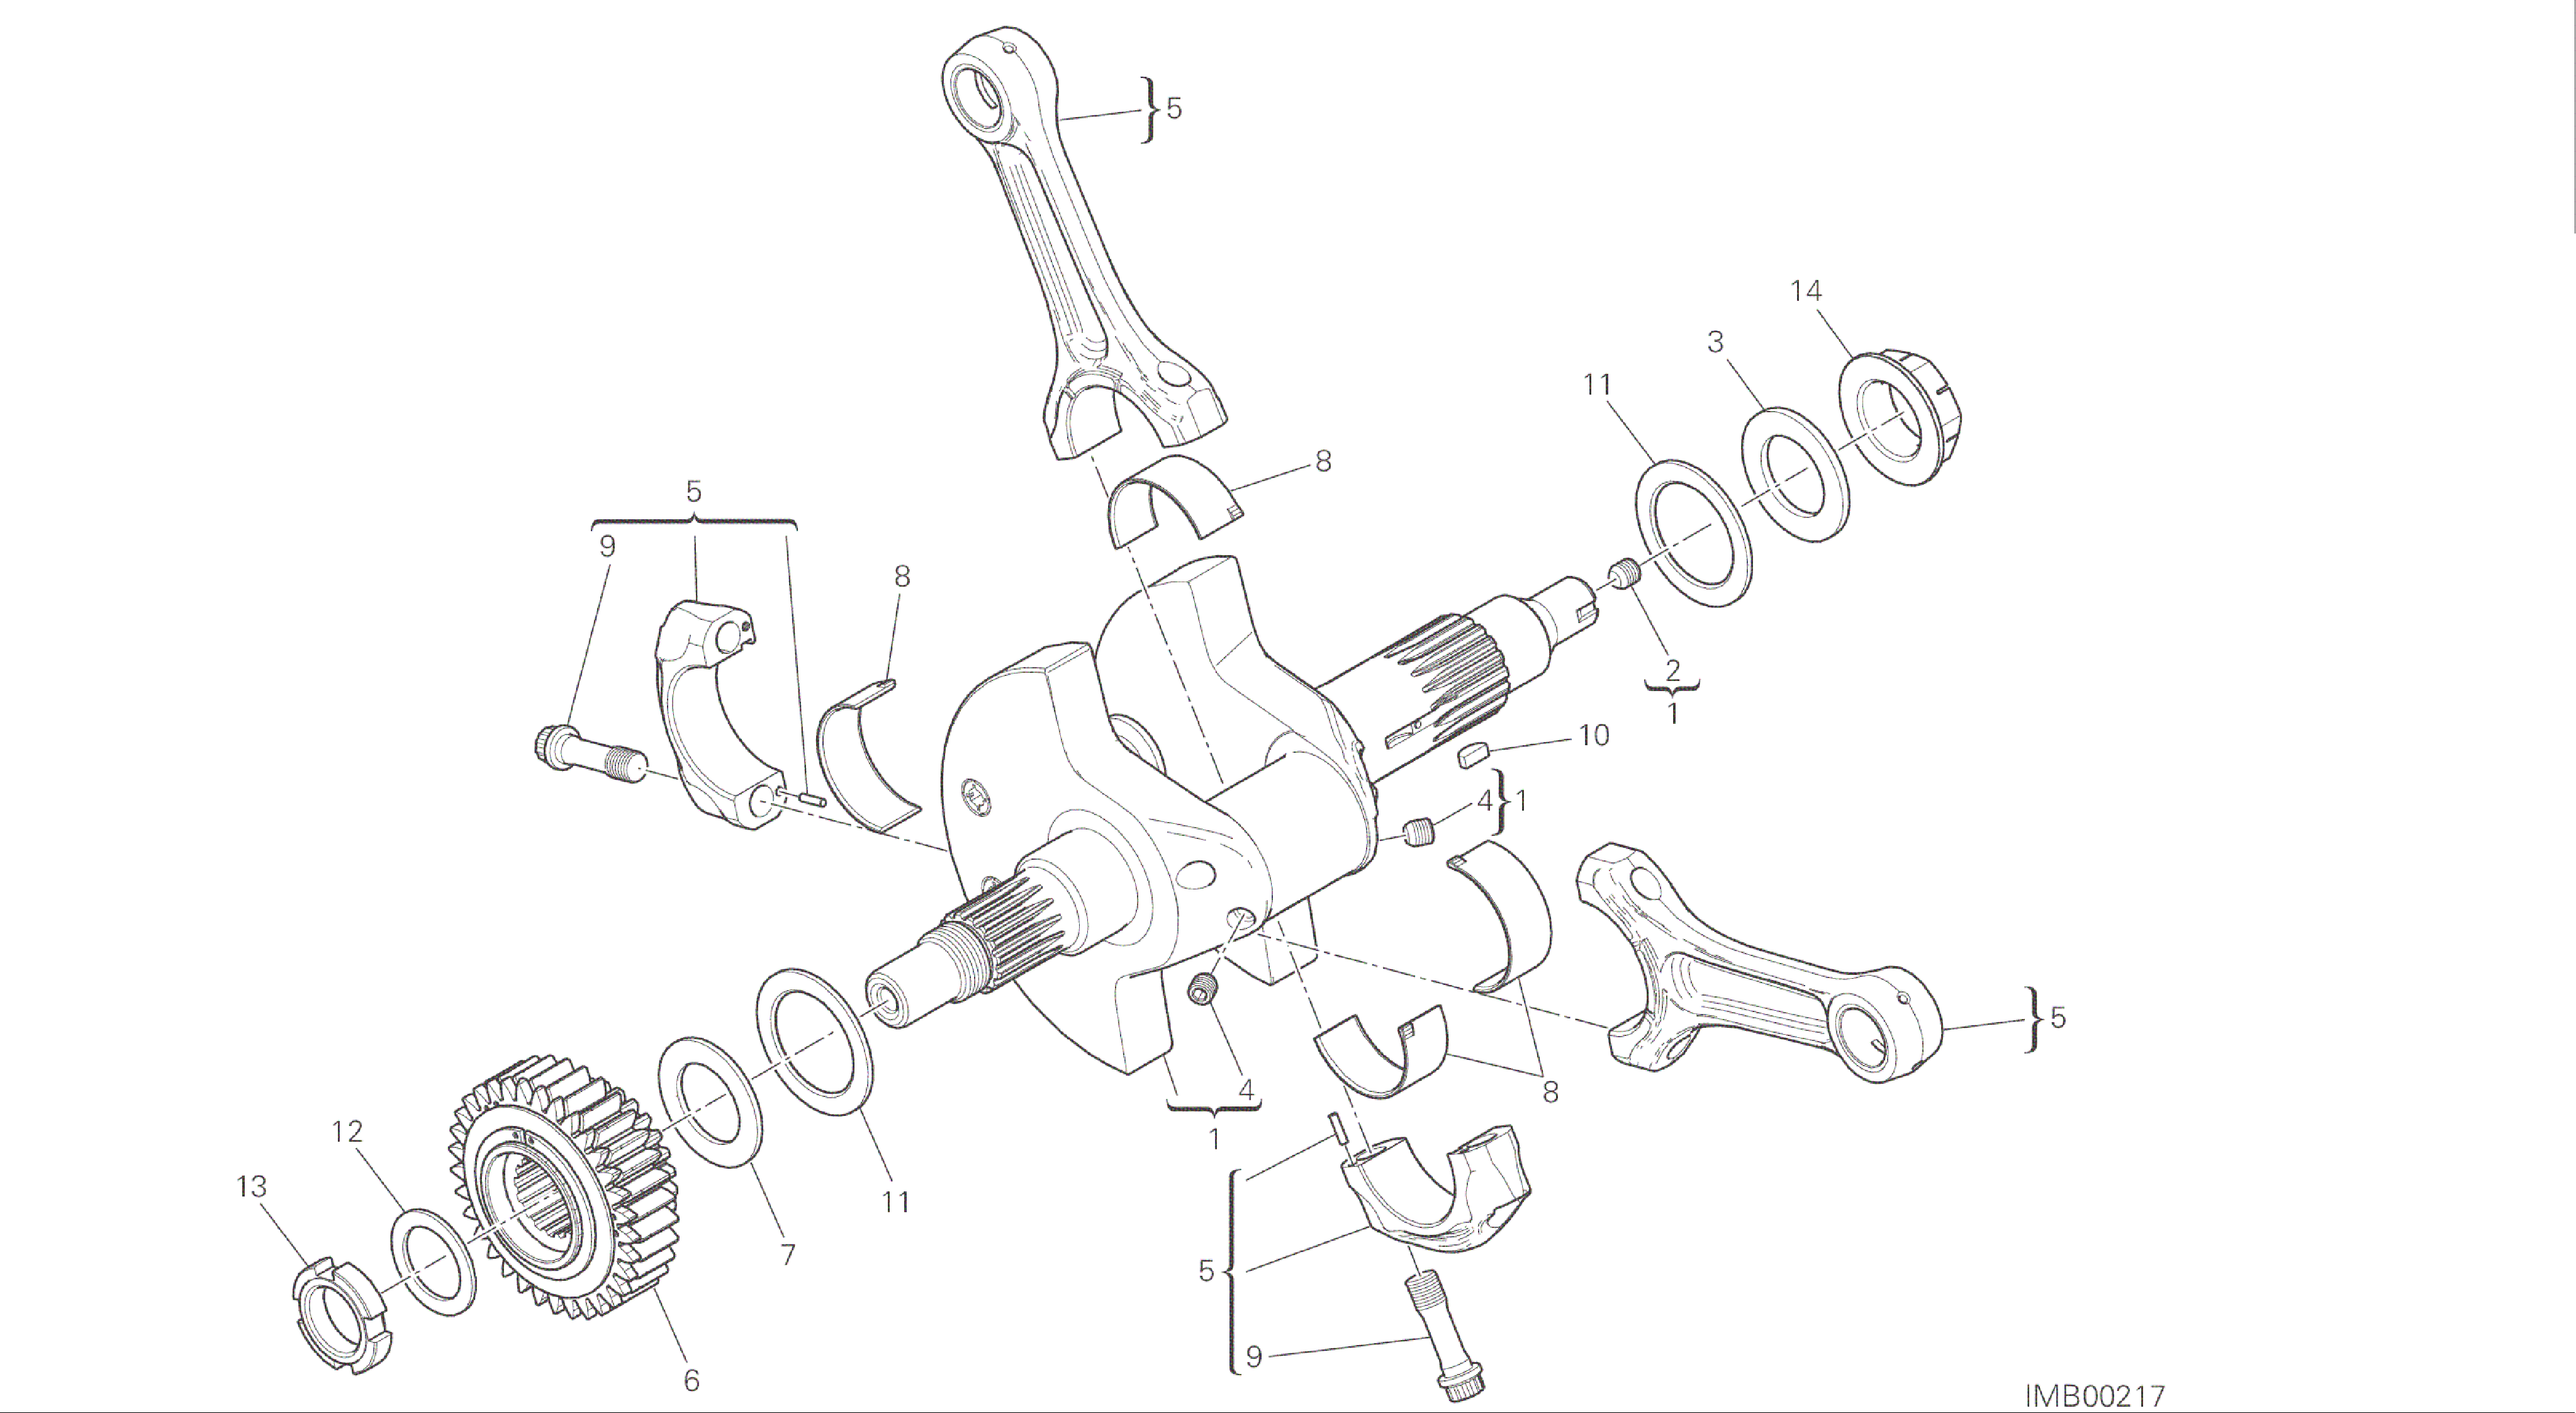 DRAWING 006 - CONNECTING RODS [MOD:MS1200S]GROUP ENGINE